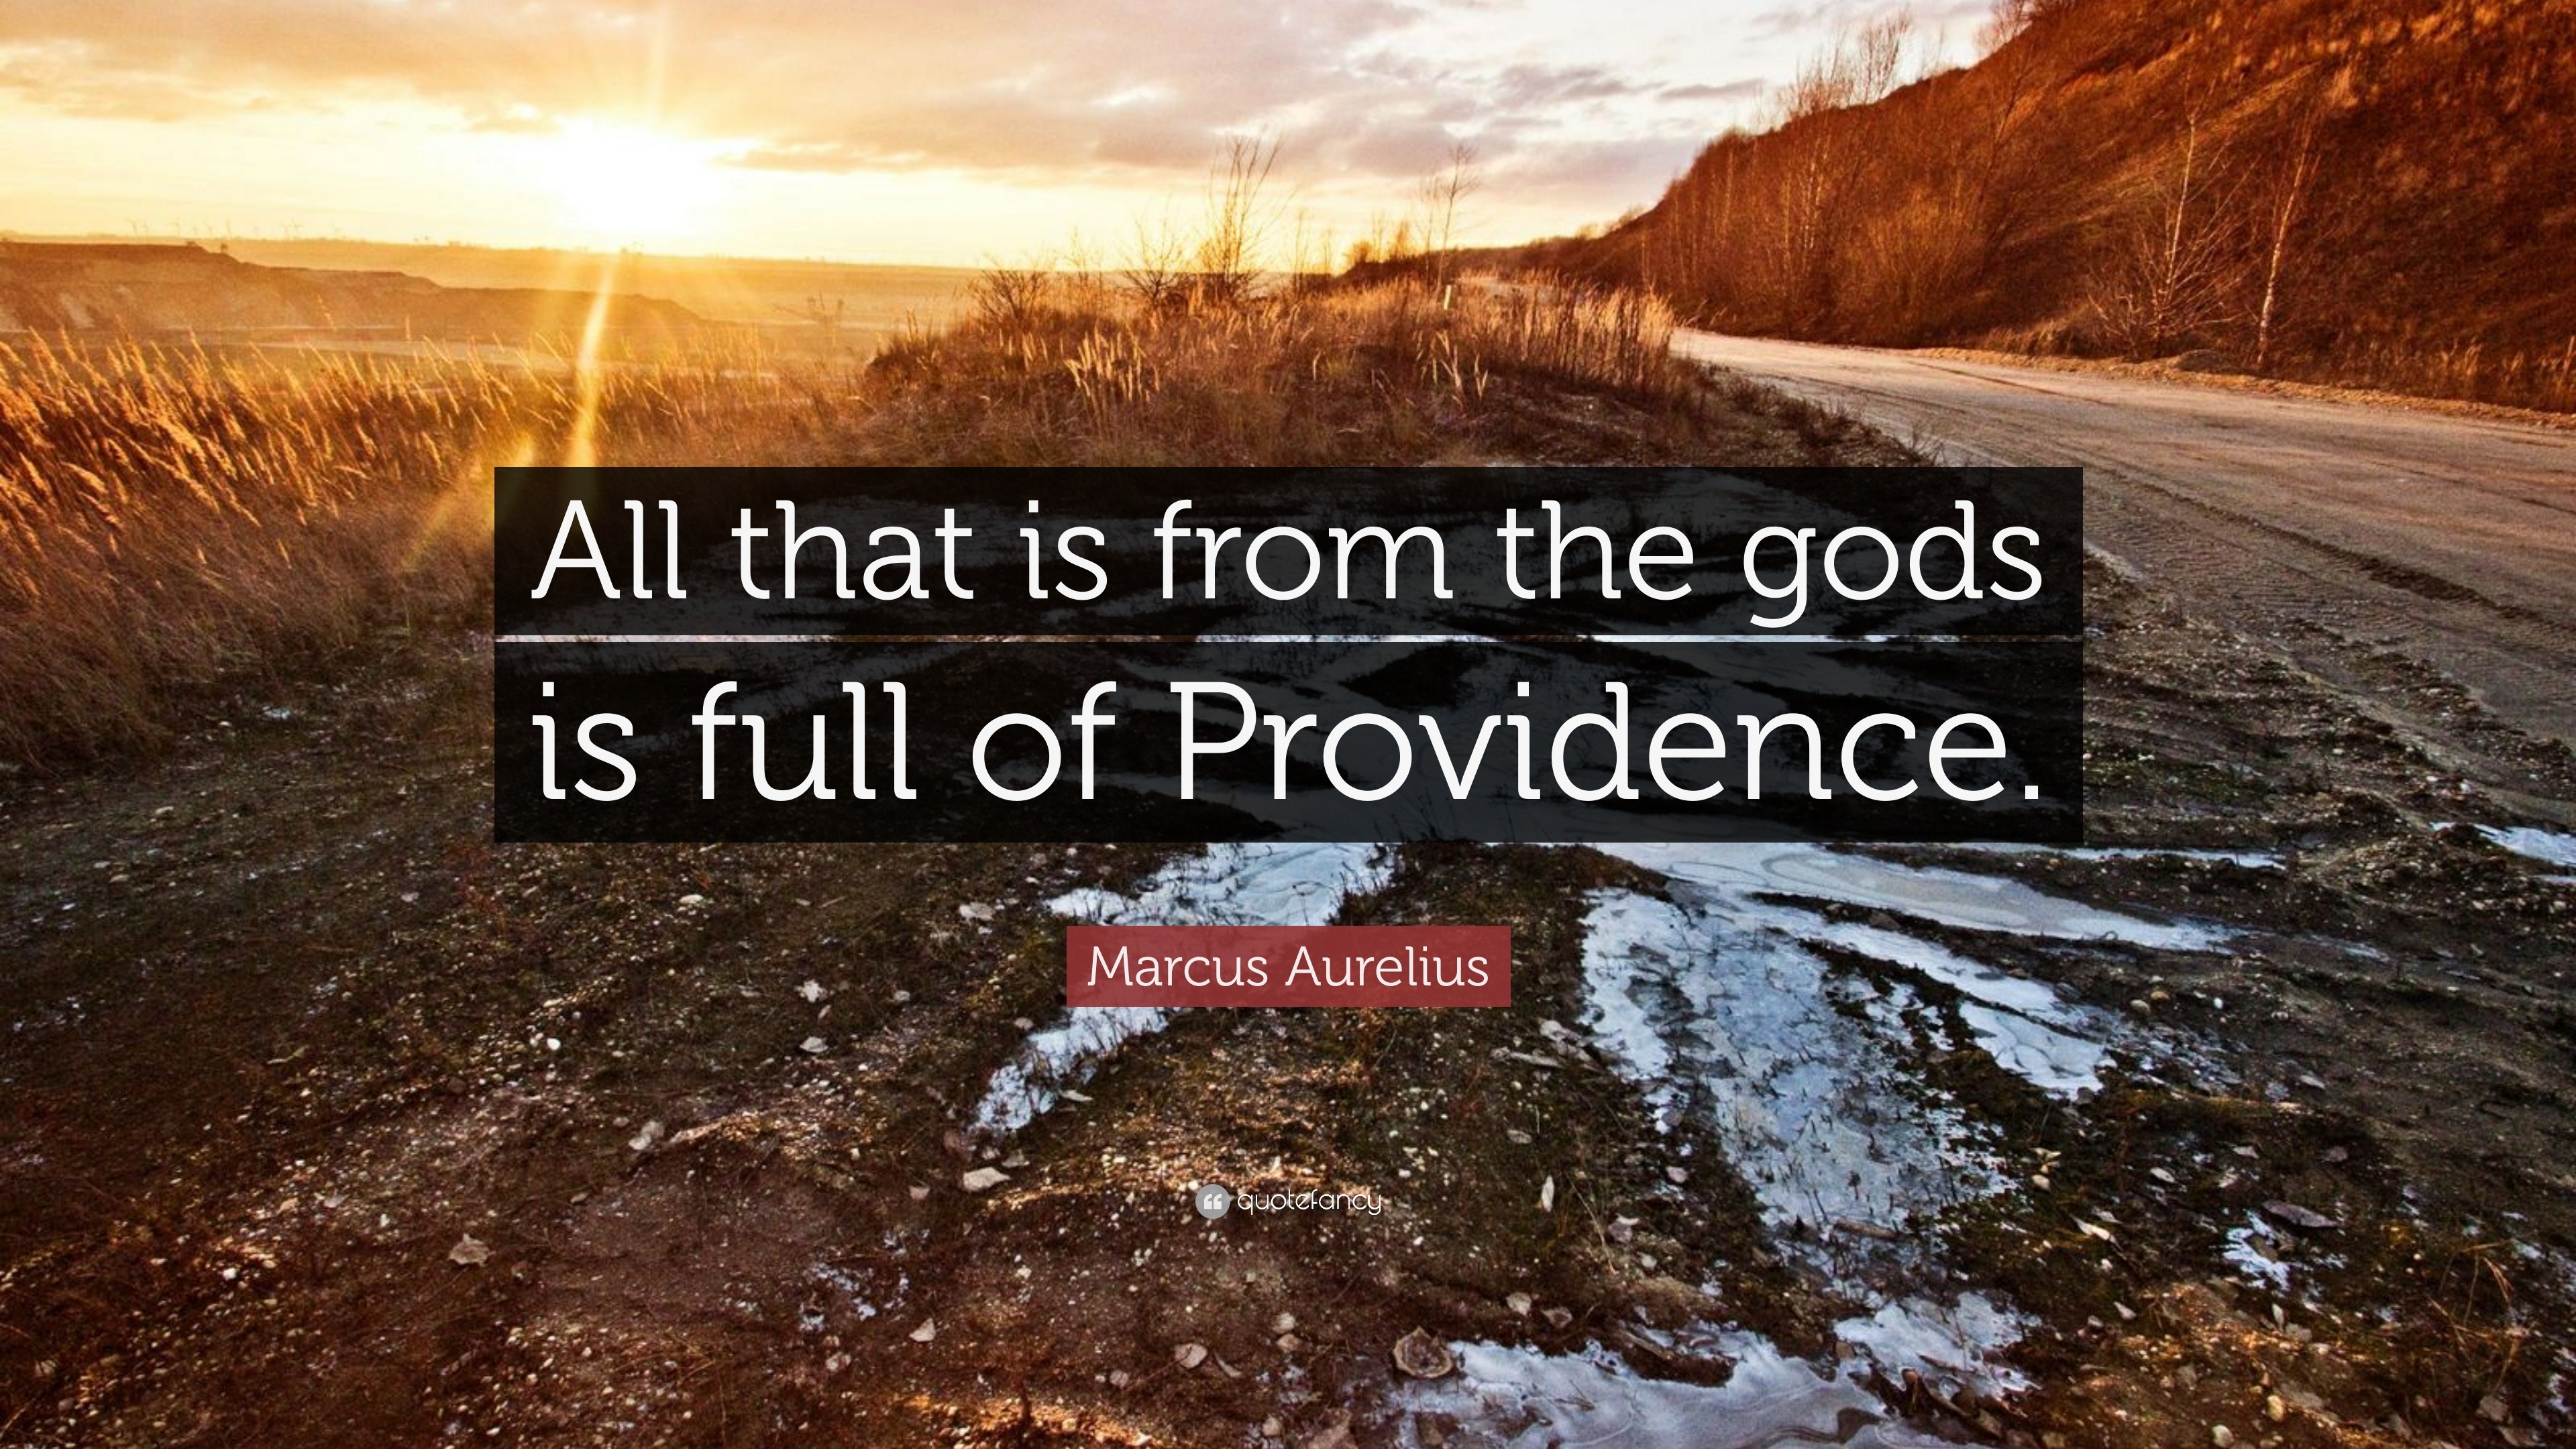 Marcus Aurelius Quote: “All that is from the gods is full of Providence.”